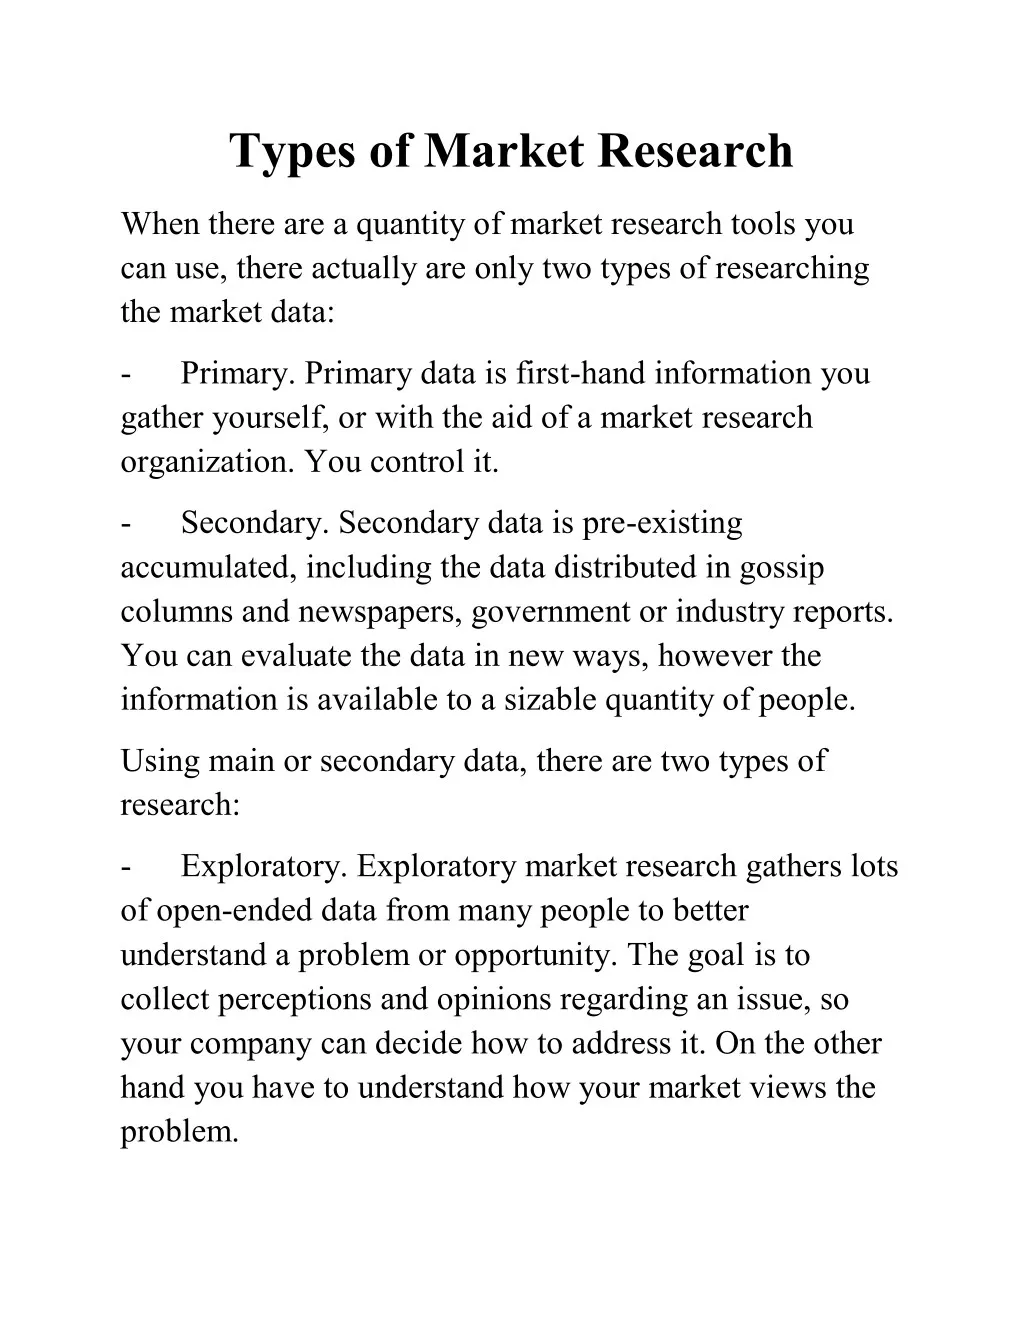 types of market research